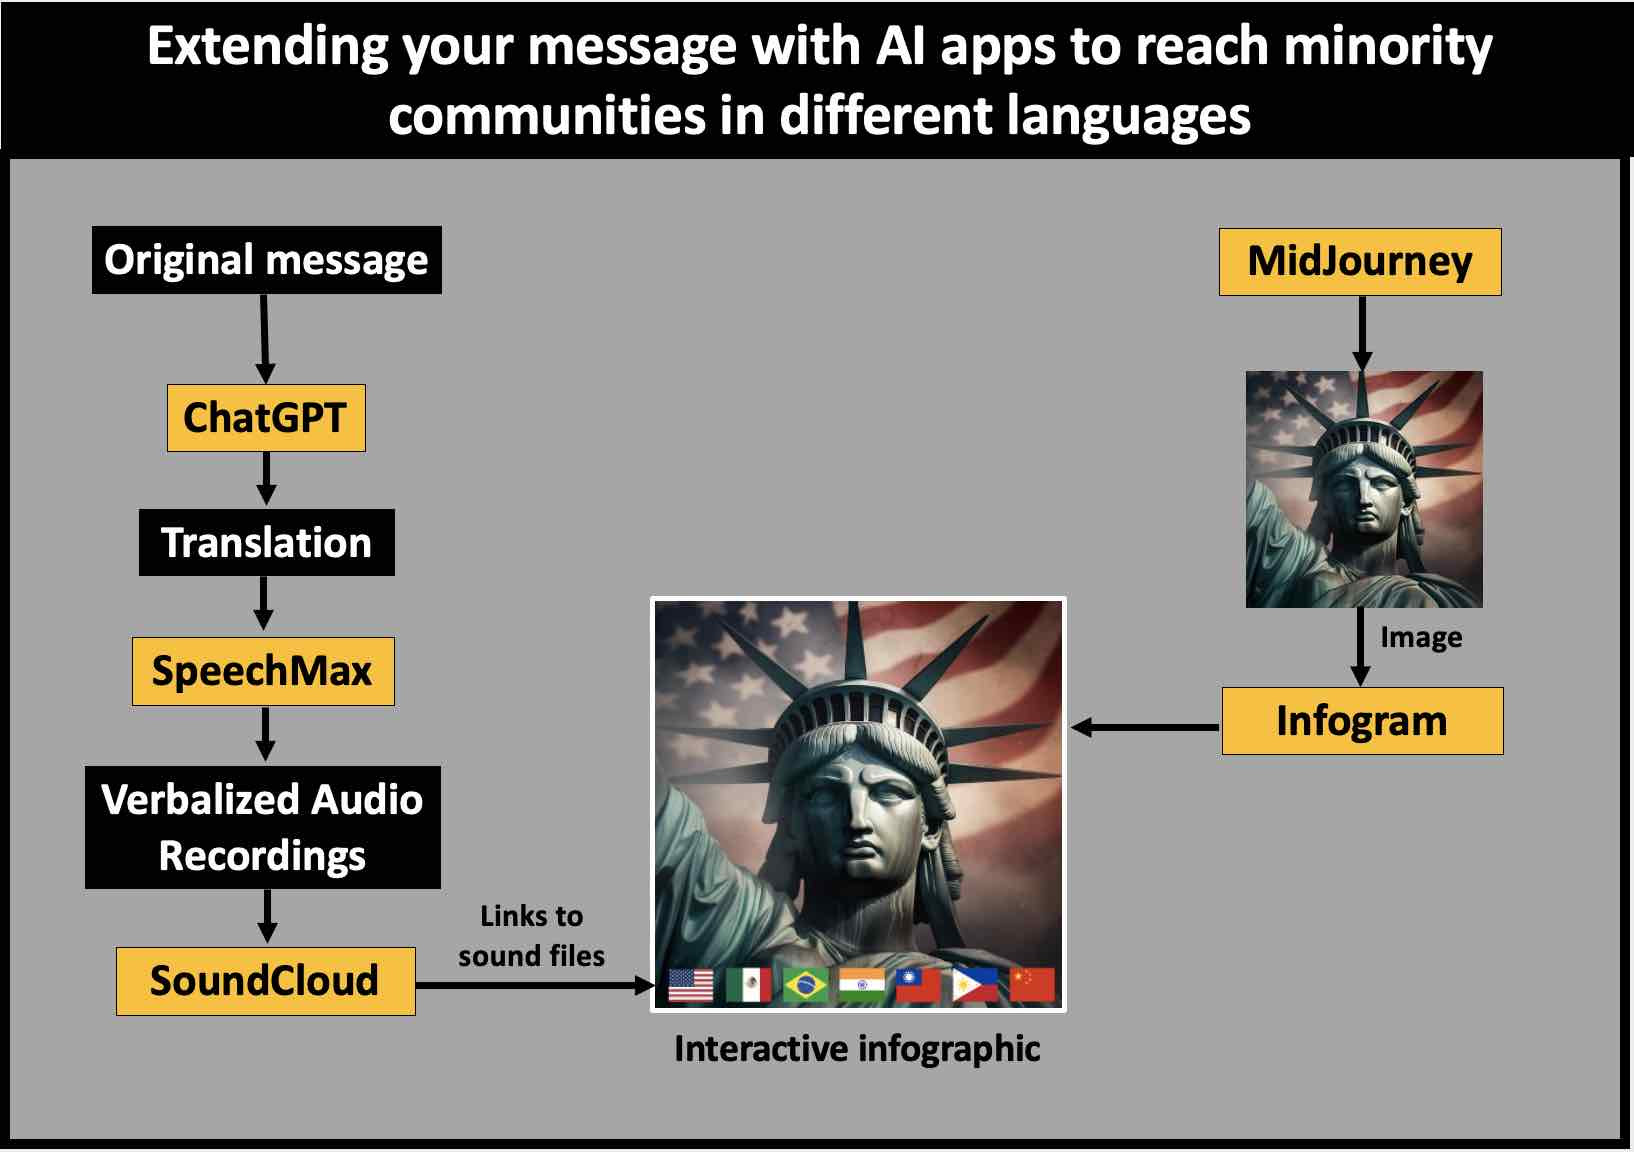 Use AI apps to customize messages in different languages to better reach minority communities.